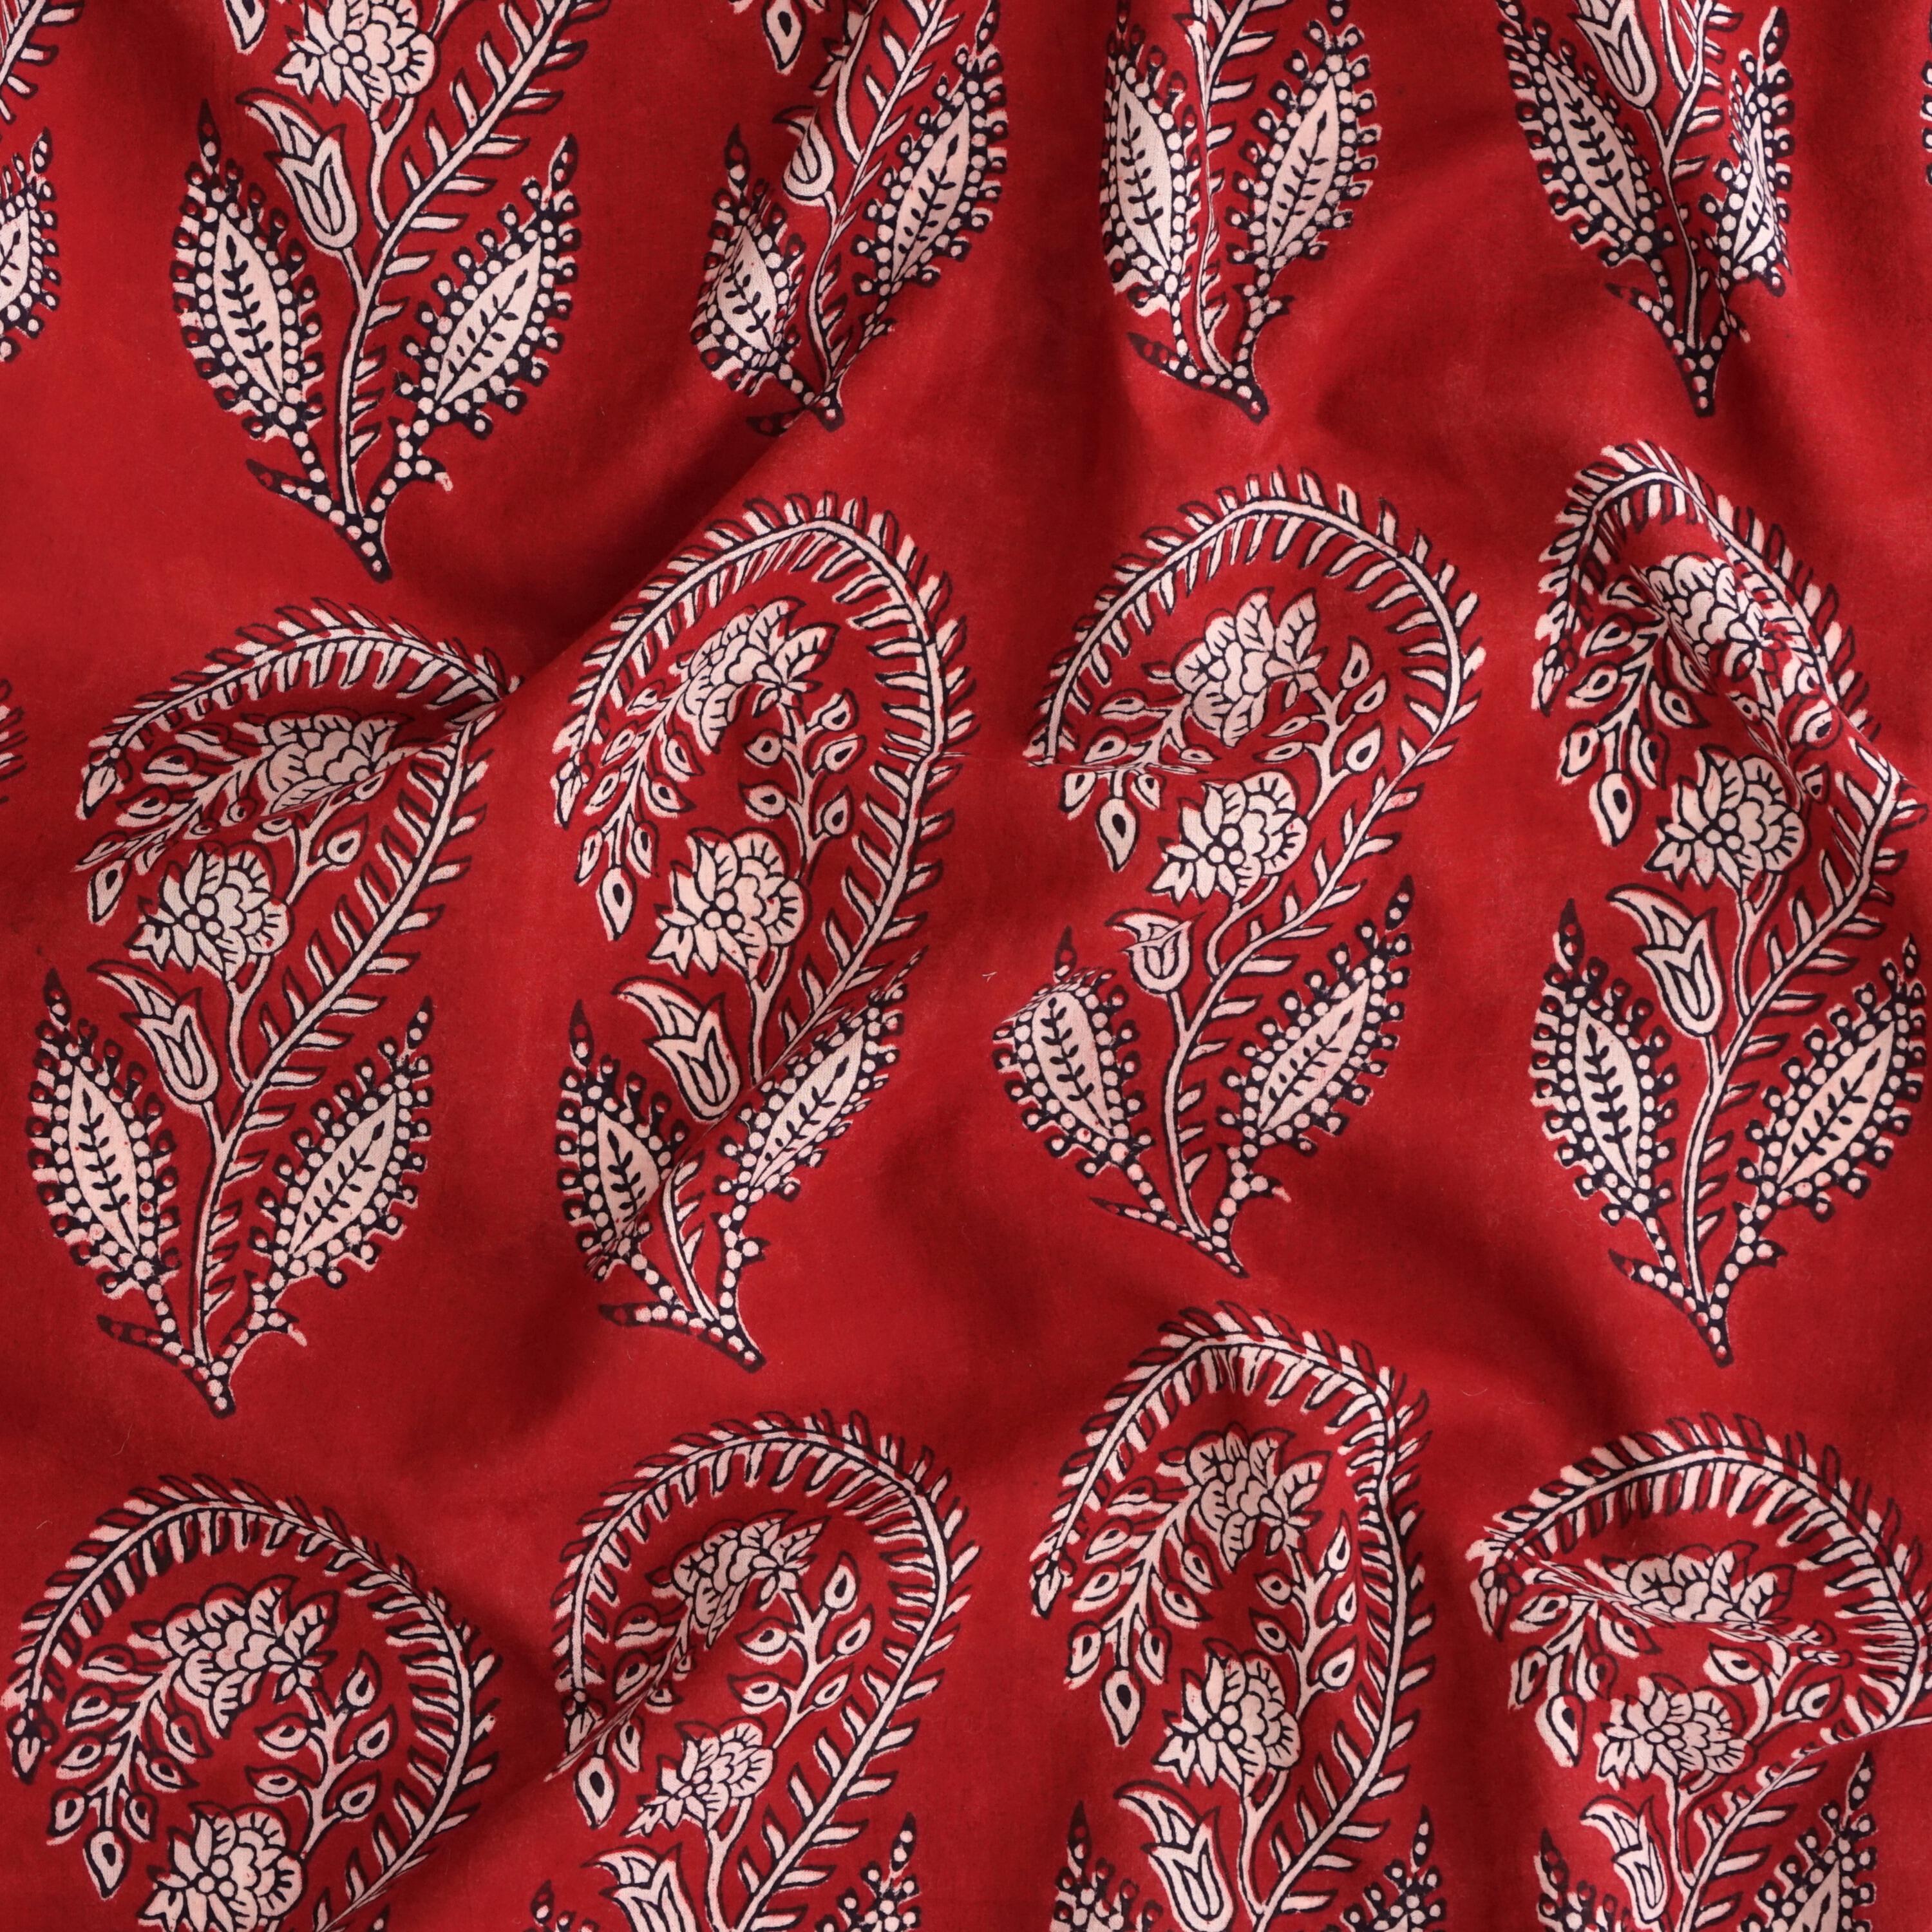 100% Block - Printed Cotton Fabric From India - Scorpion Design - Iron Rust Black & Alizarin Red Dyes - Contrast